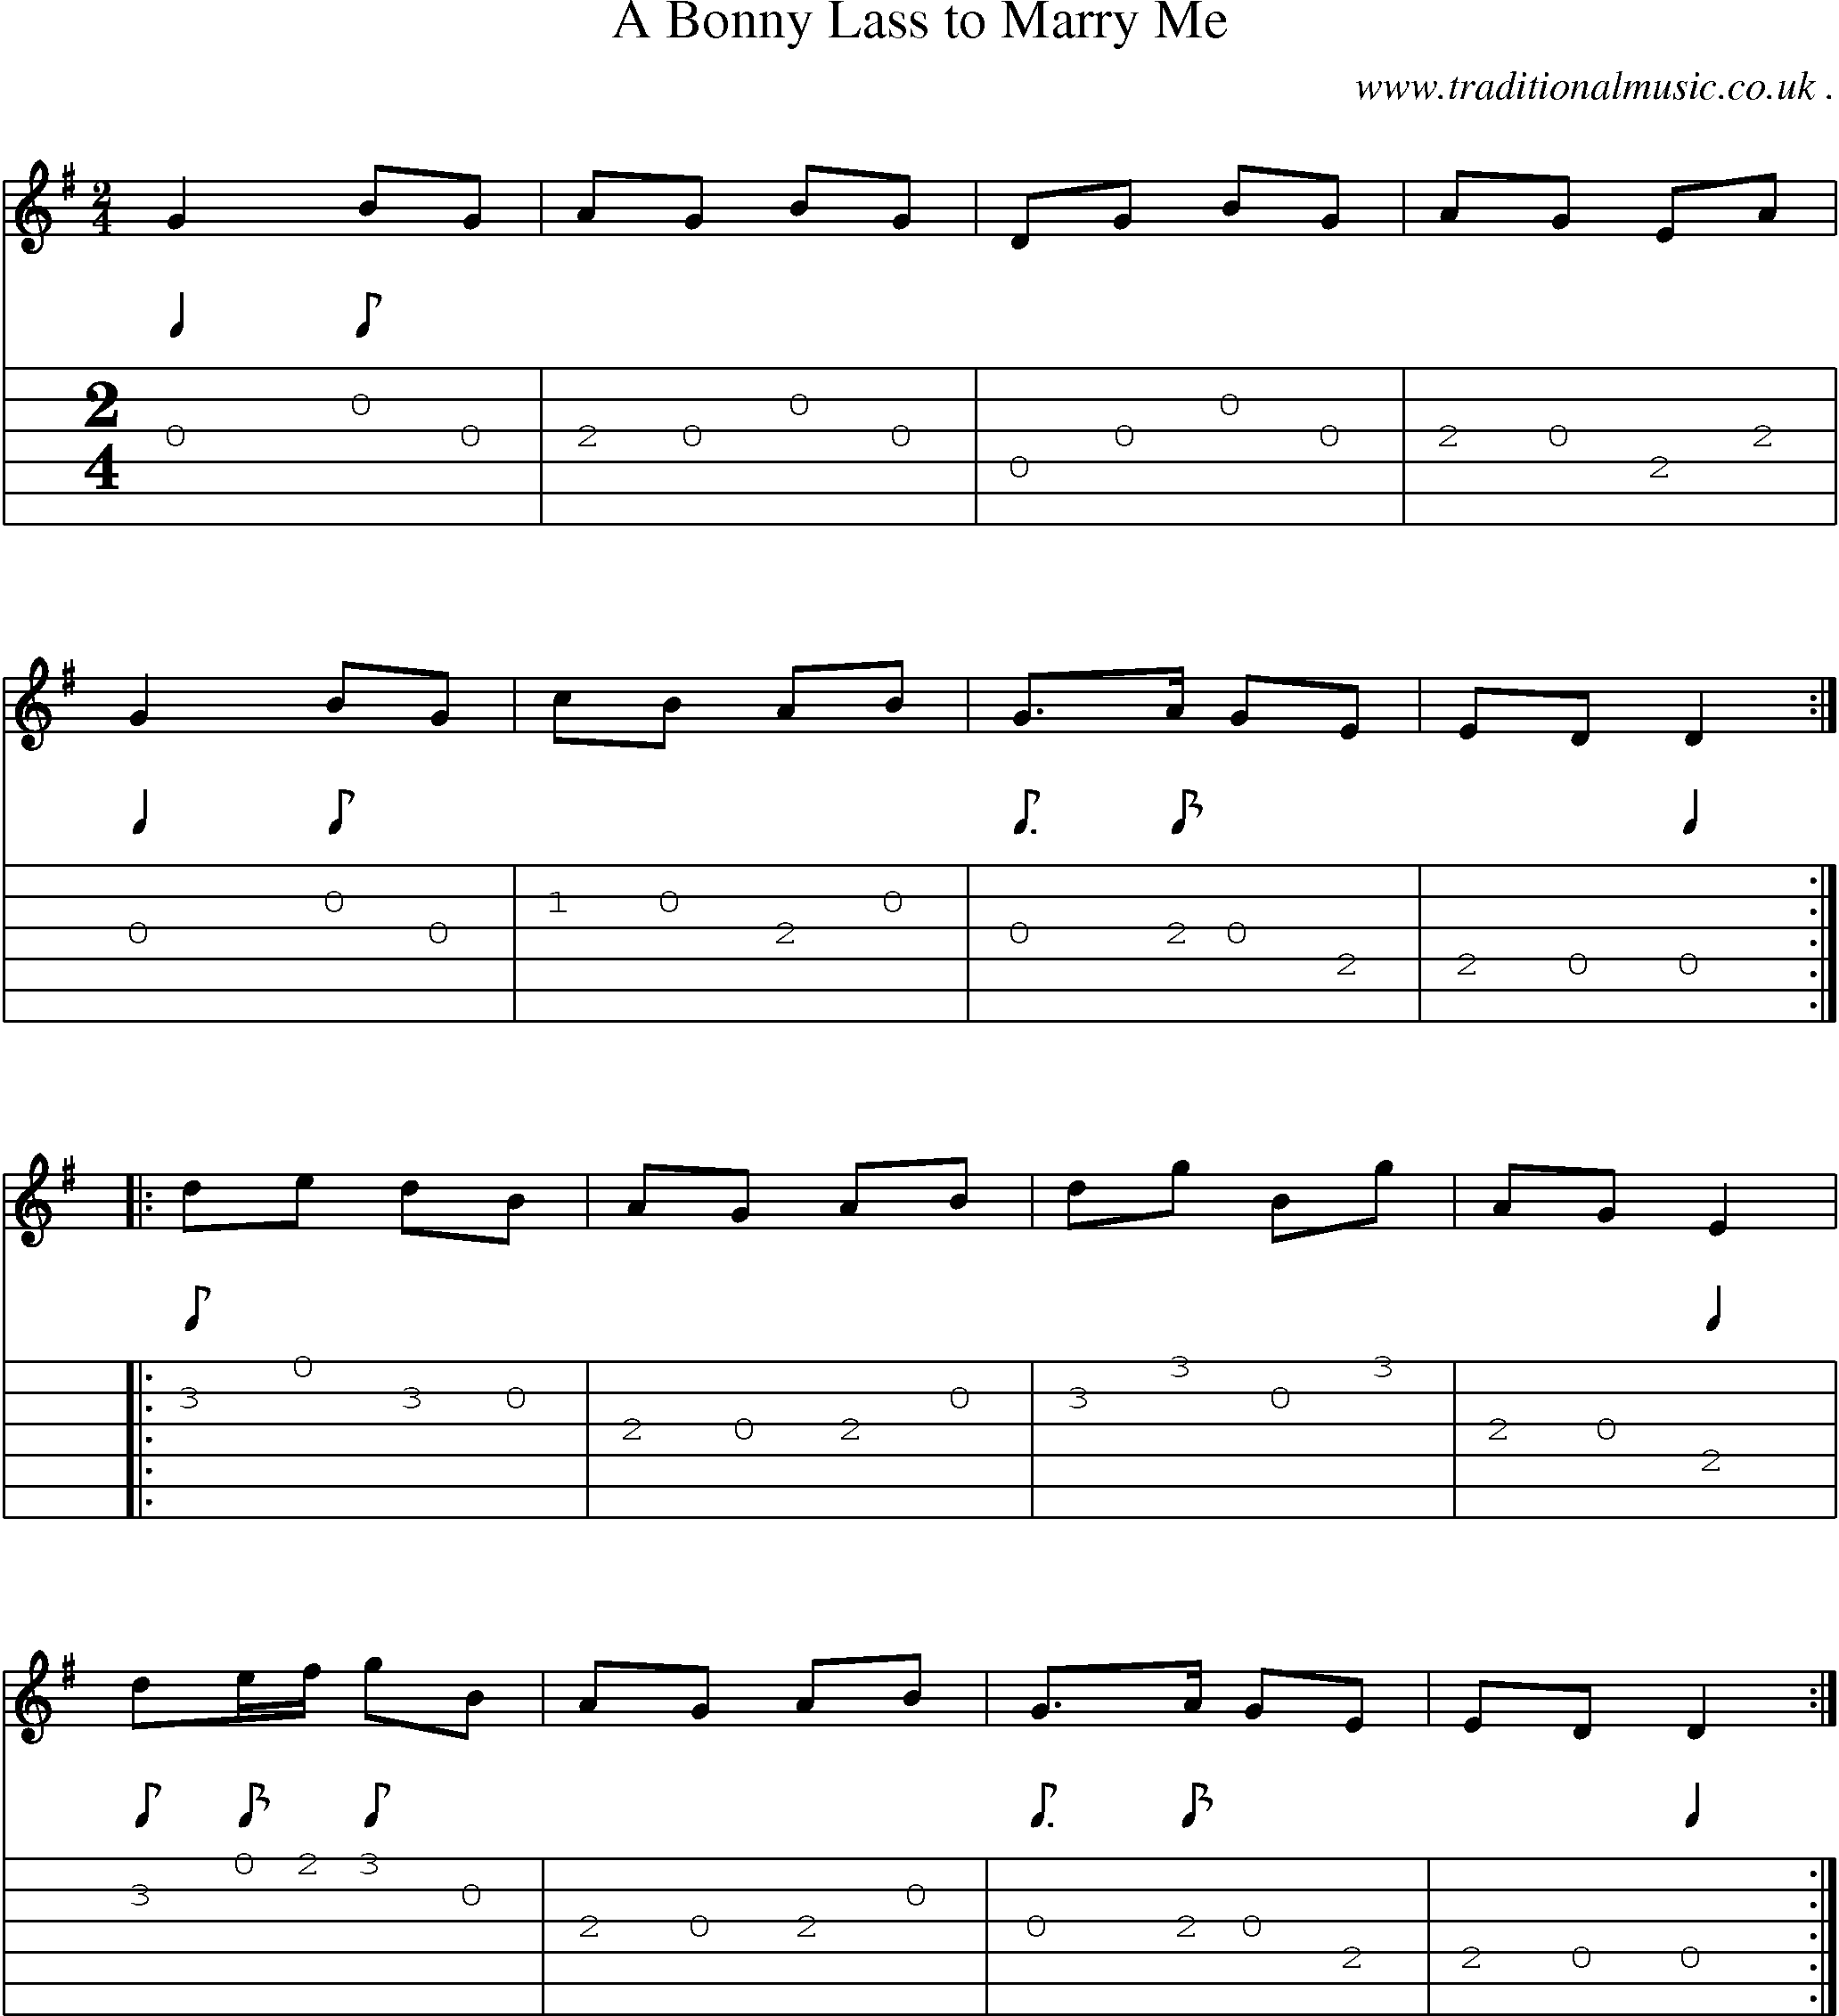 Sheet-Music and Guitar Tabs for A Bonny Lass To Marry Me